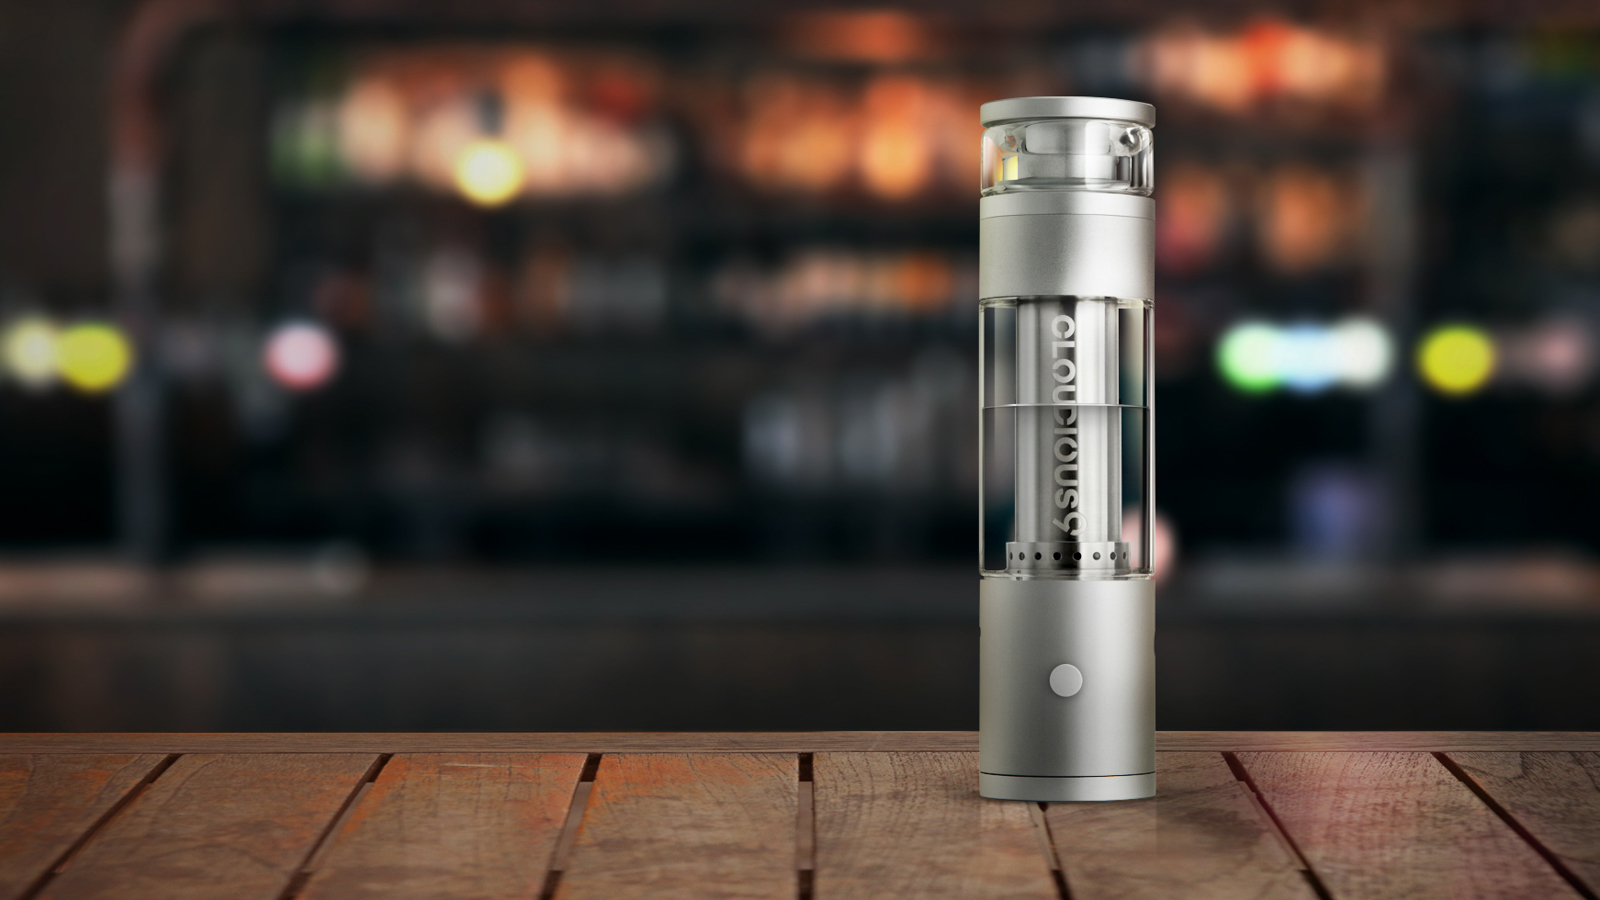 everything-you-need-to-know-about-the-cloudious9-hydrology9-vaporizer